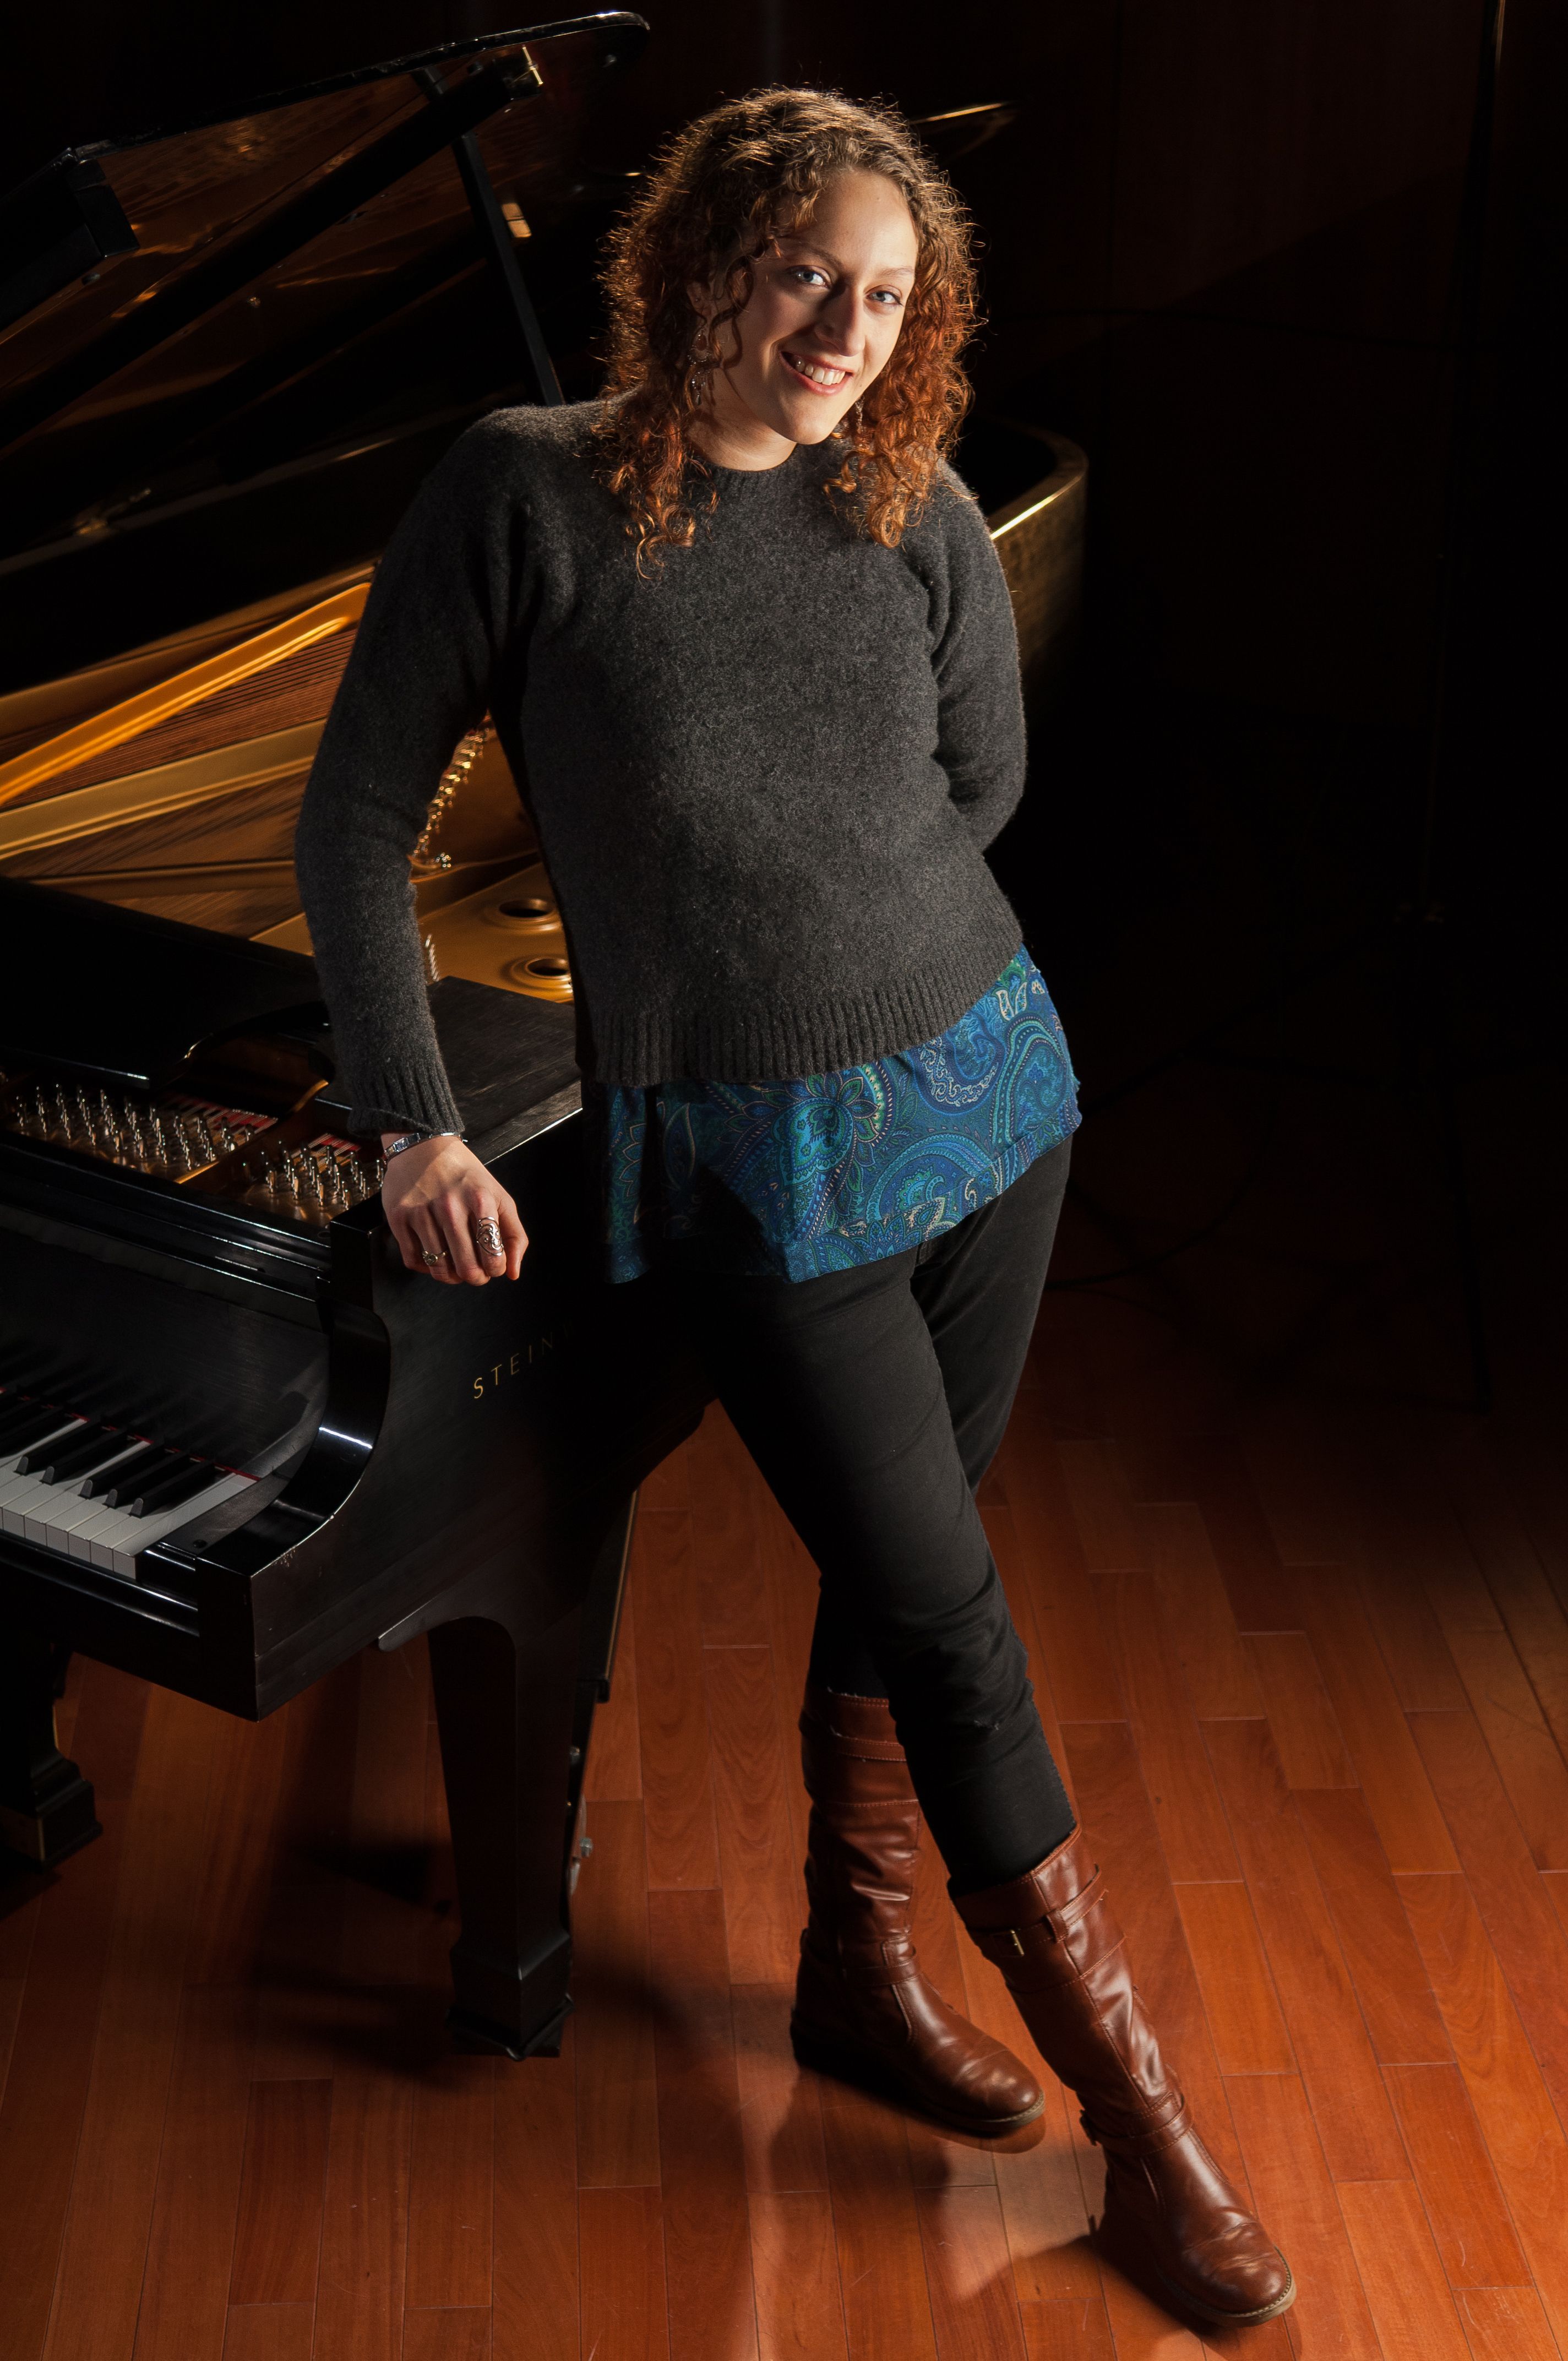 Portrait of young pianist standing with her piano